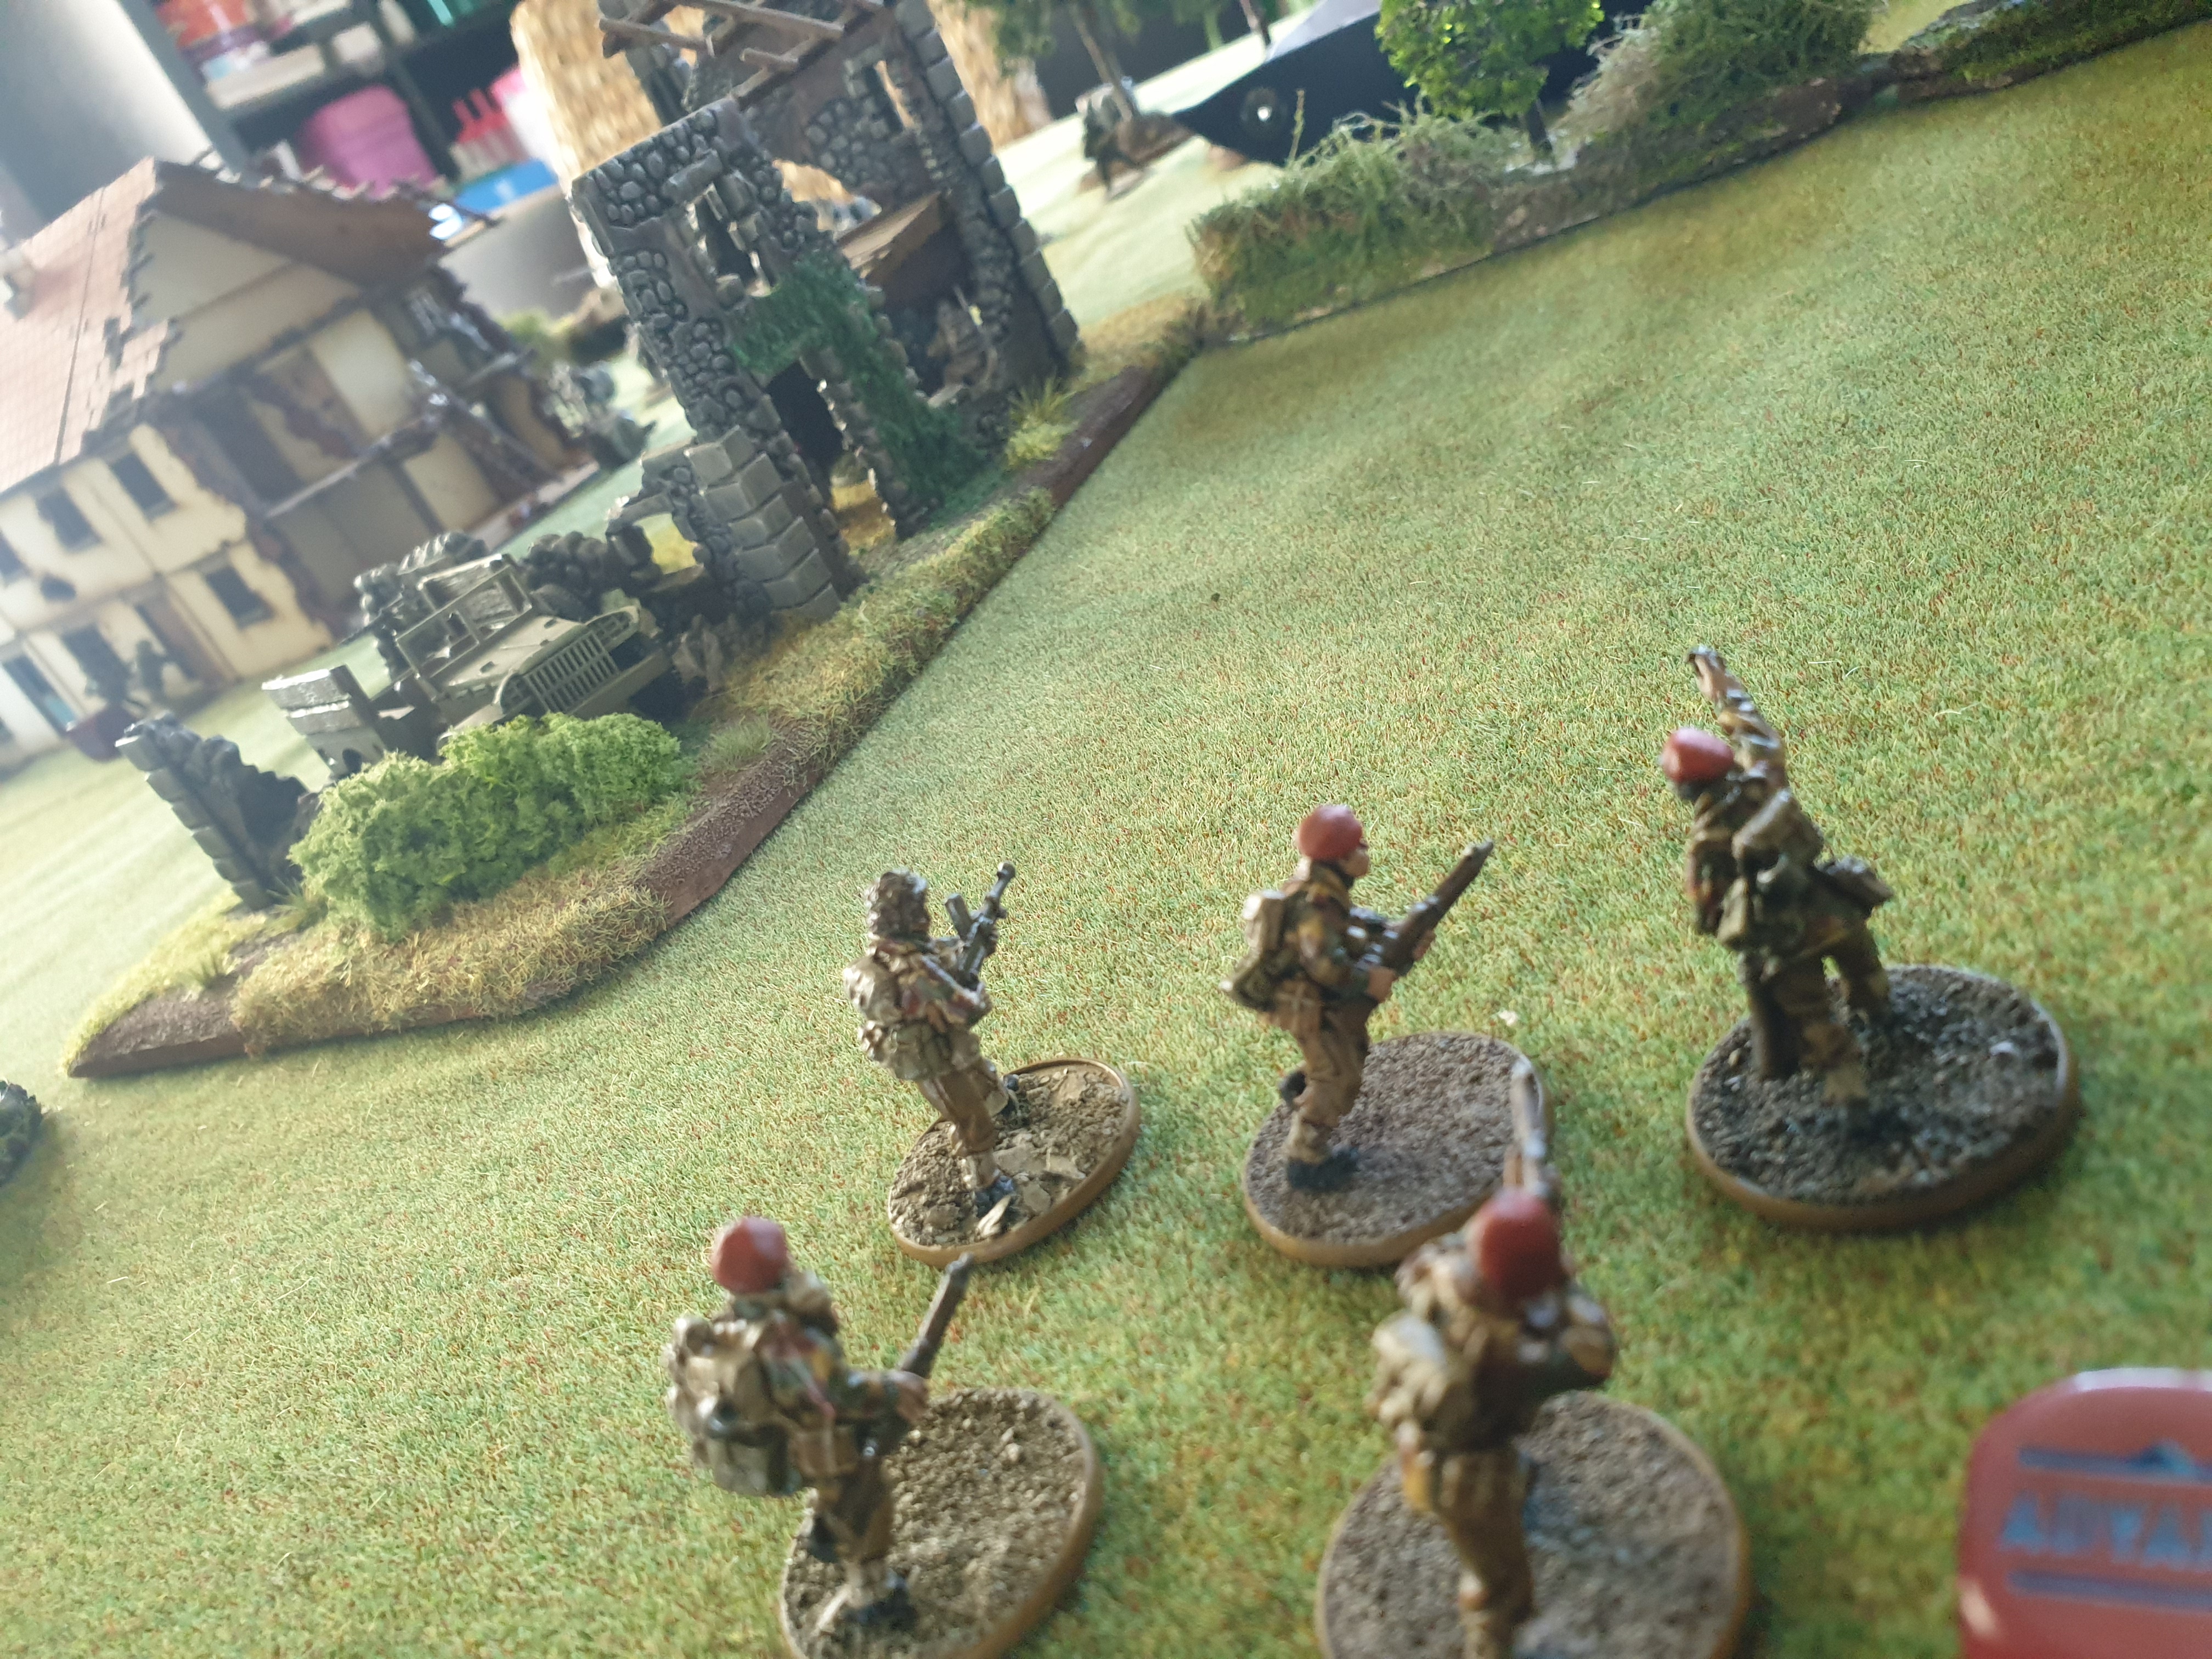 US Army 1st Infantry Division versus 352nd Infantry Division in a fierce infantry engagement